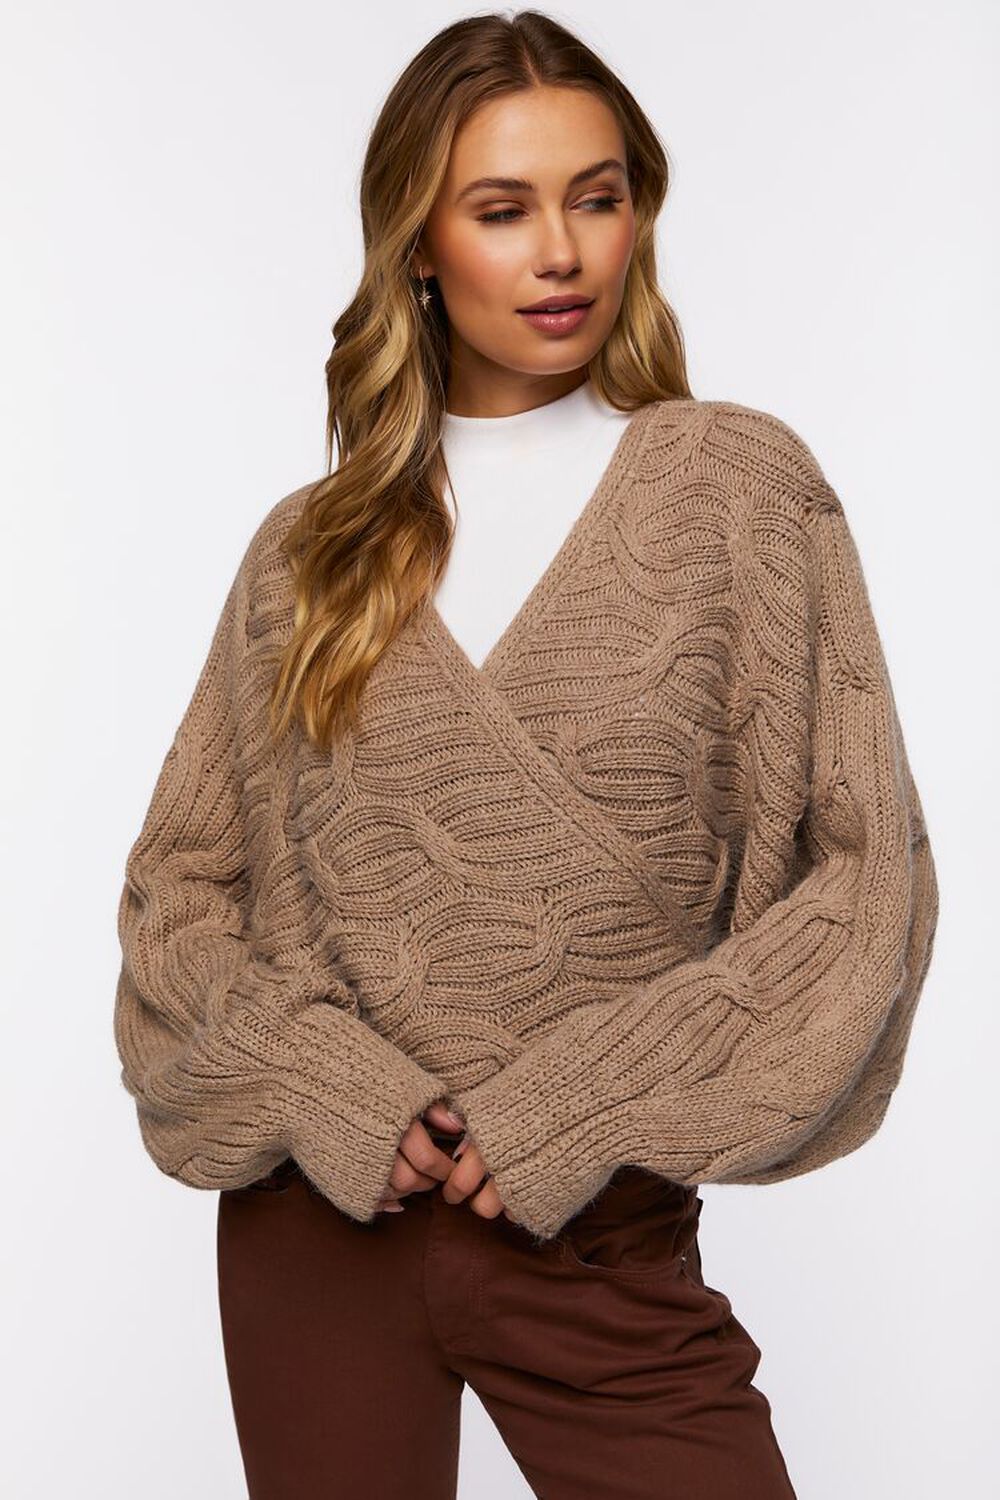 Wraparound Cable Knit Sweater, image 1